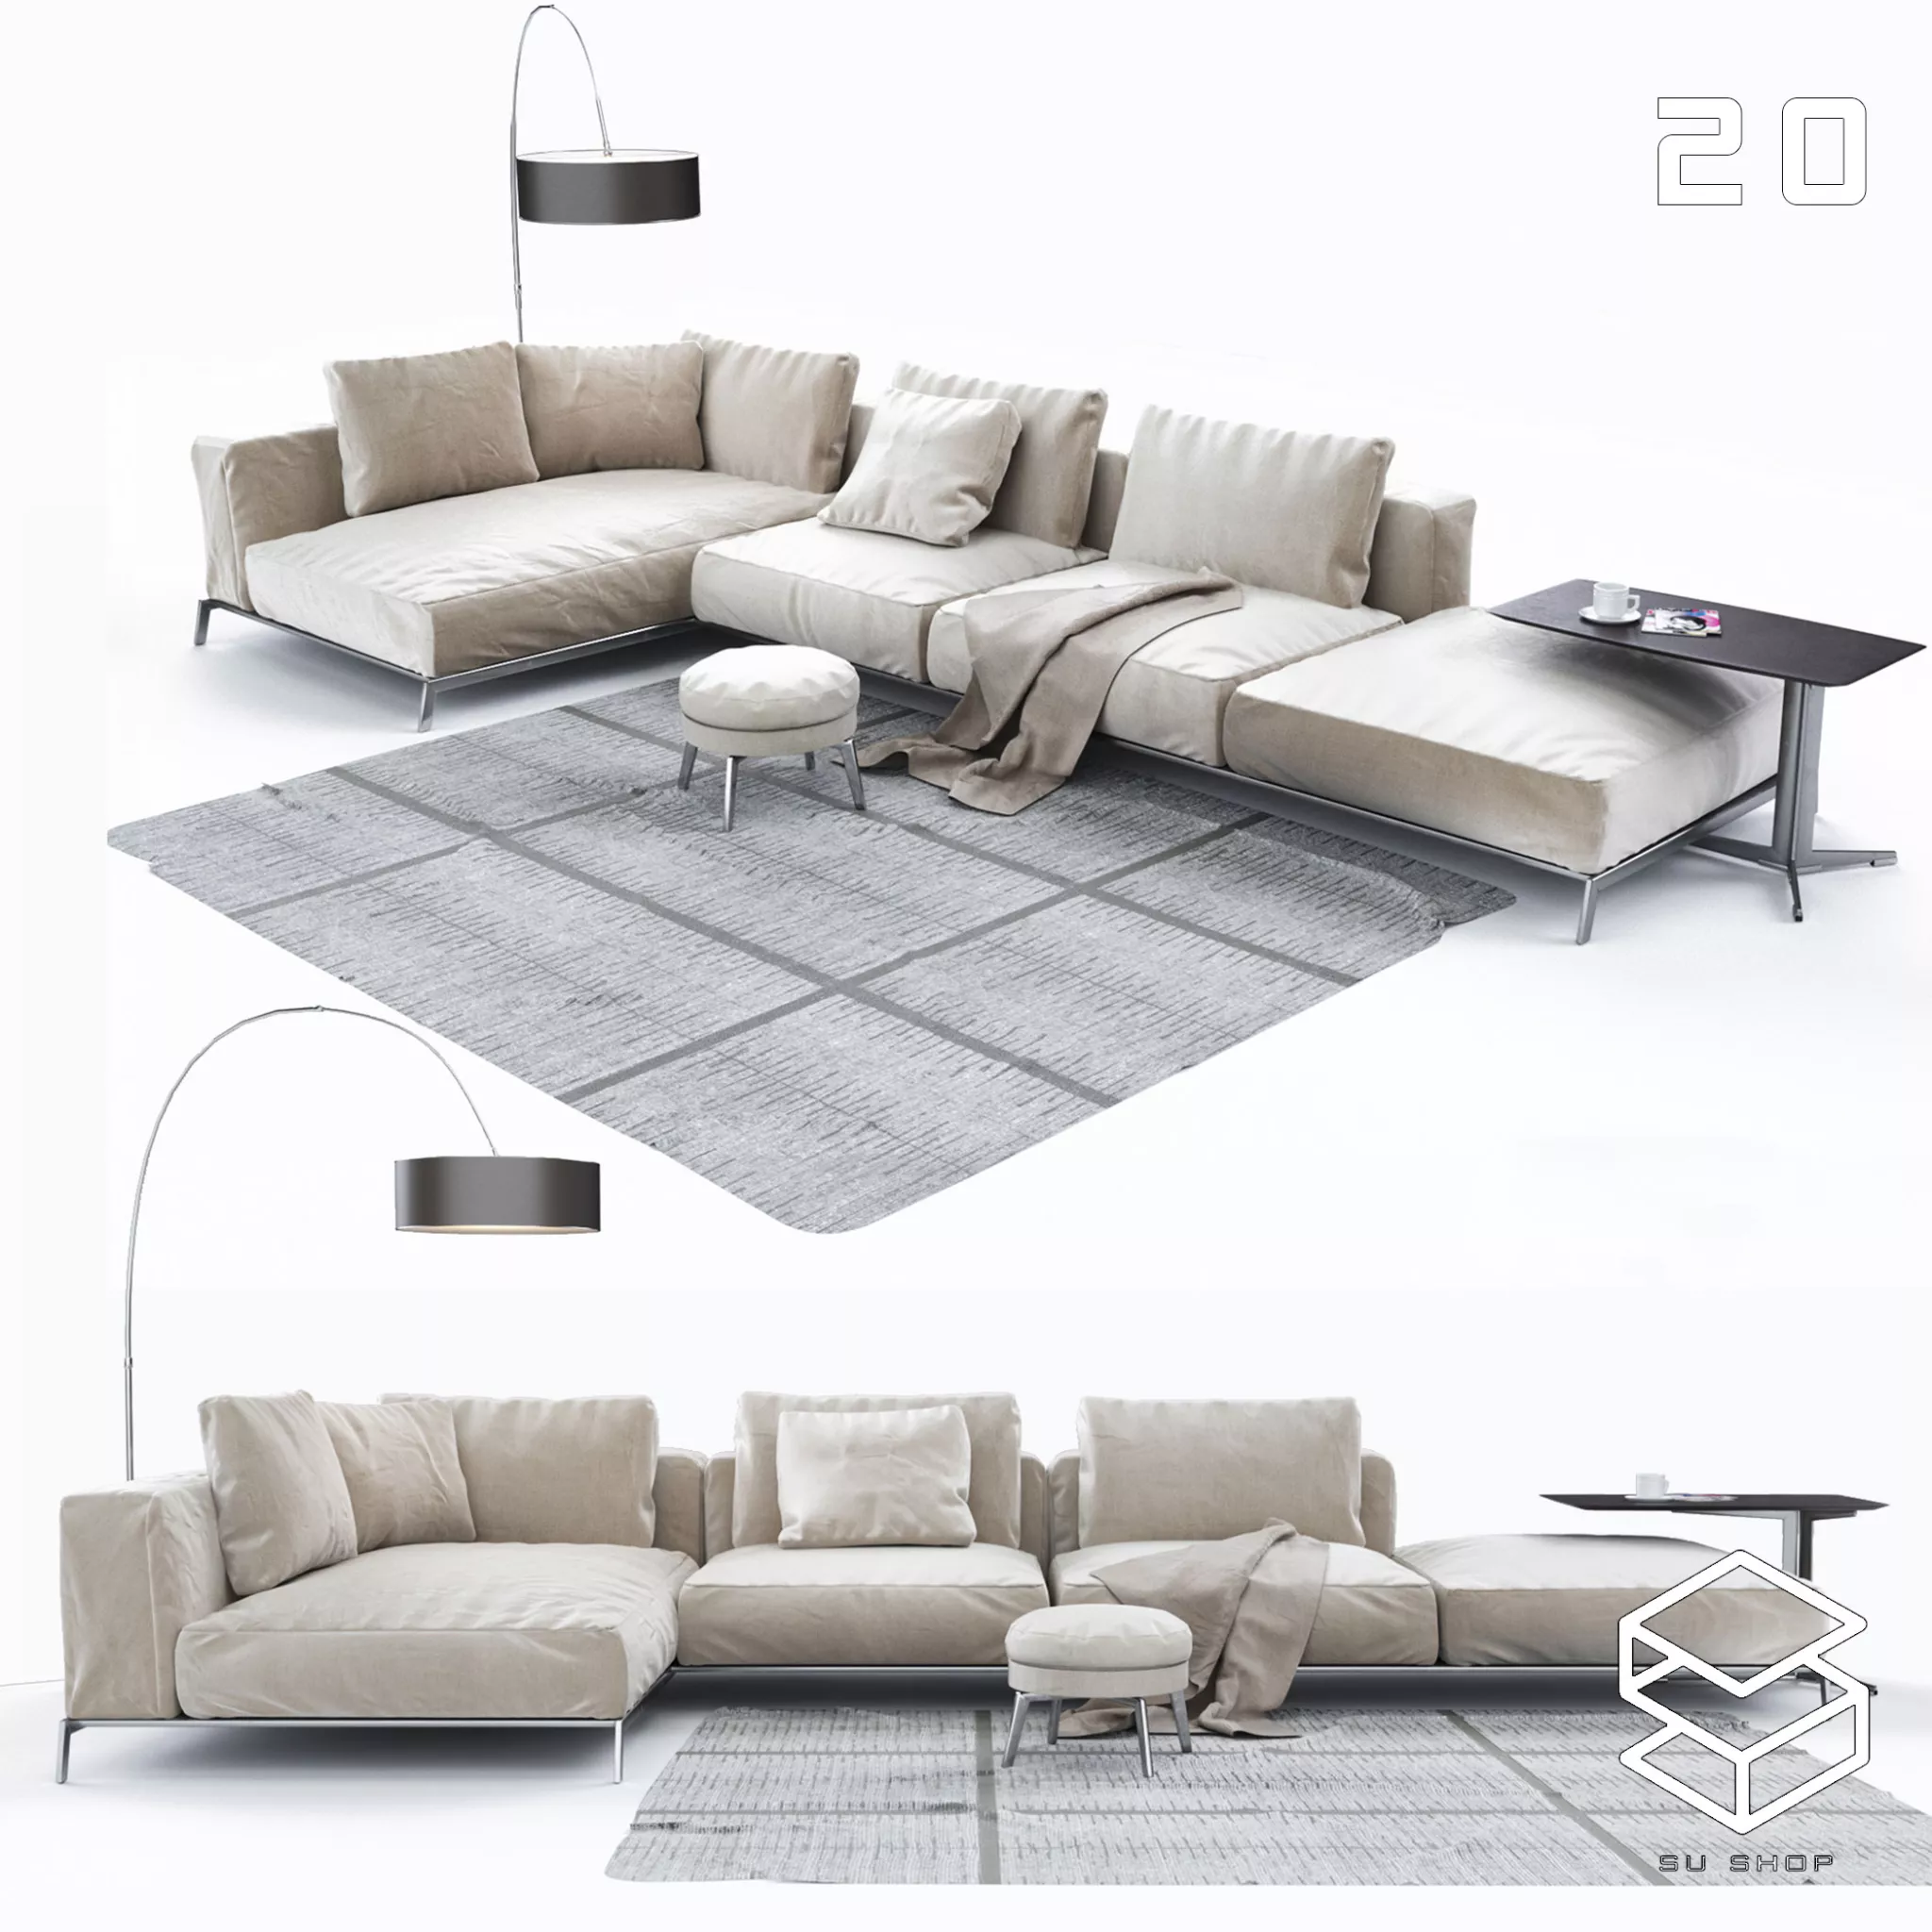 MODERN SOFA - SKETCHUP 3D MODEL - VRAY OR ENSCAPE - ID13497